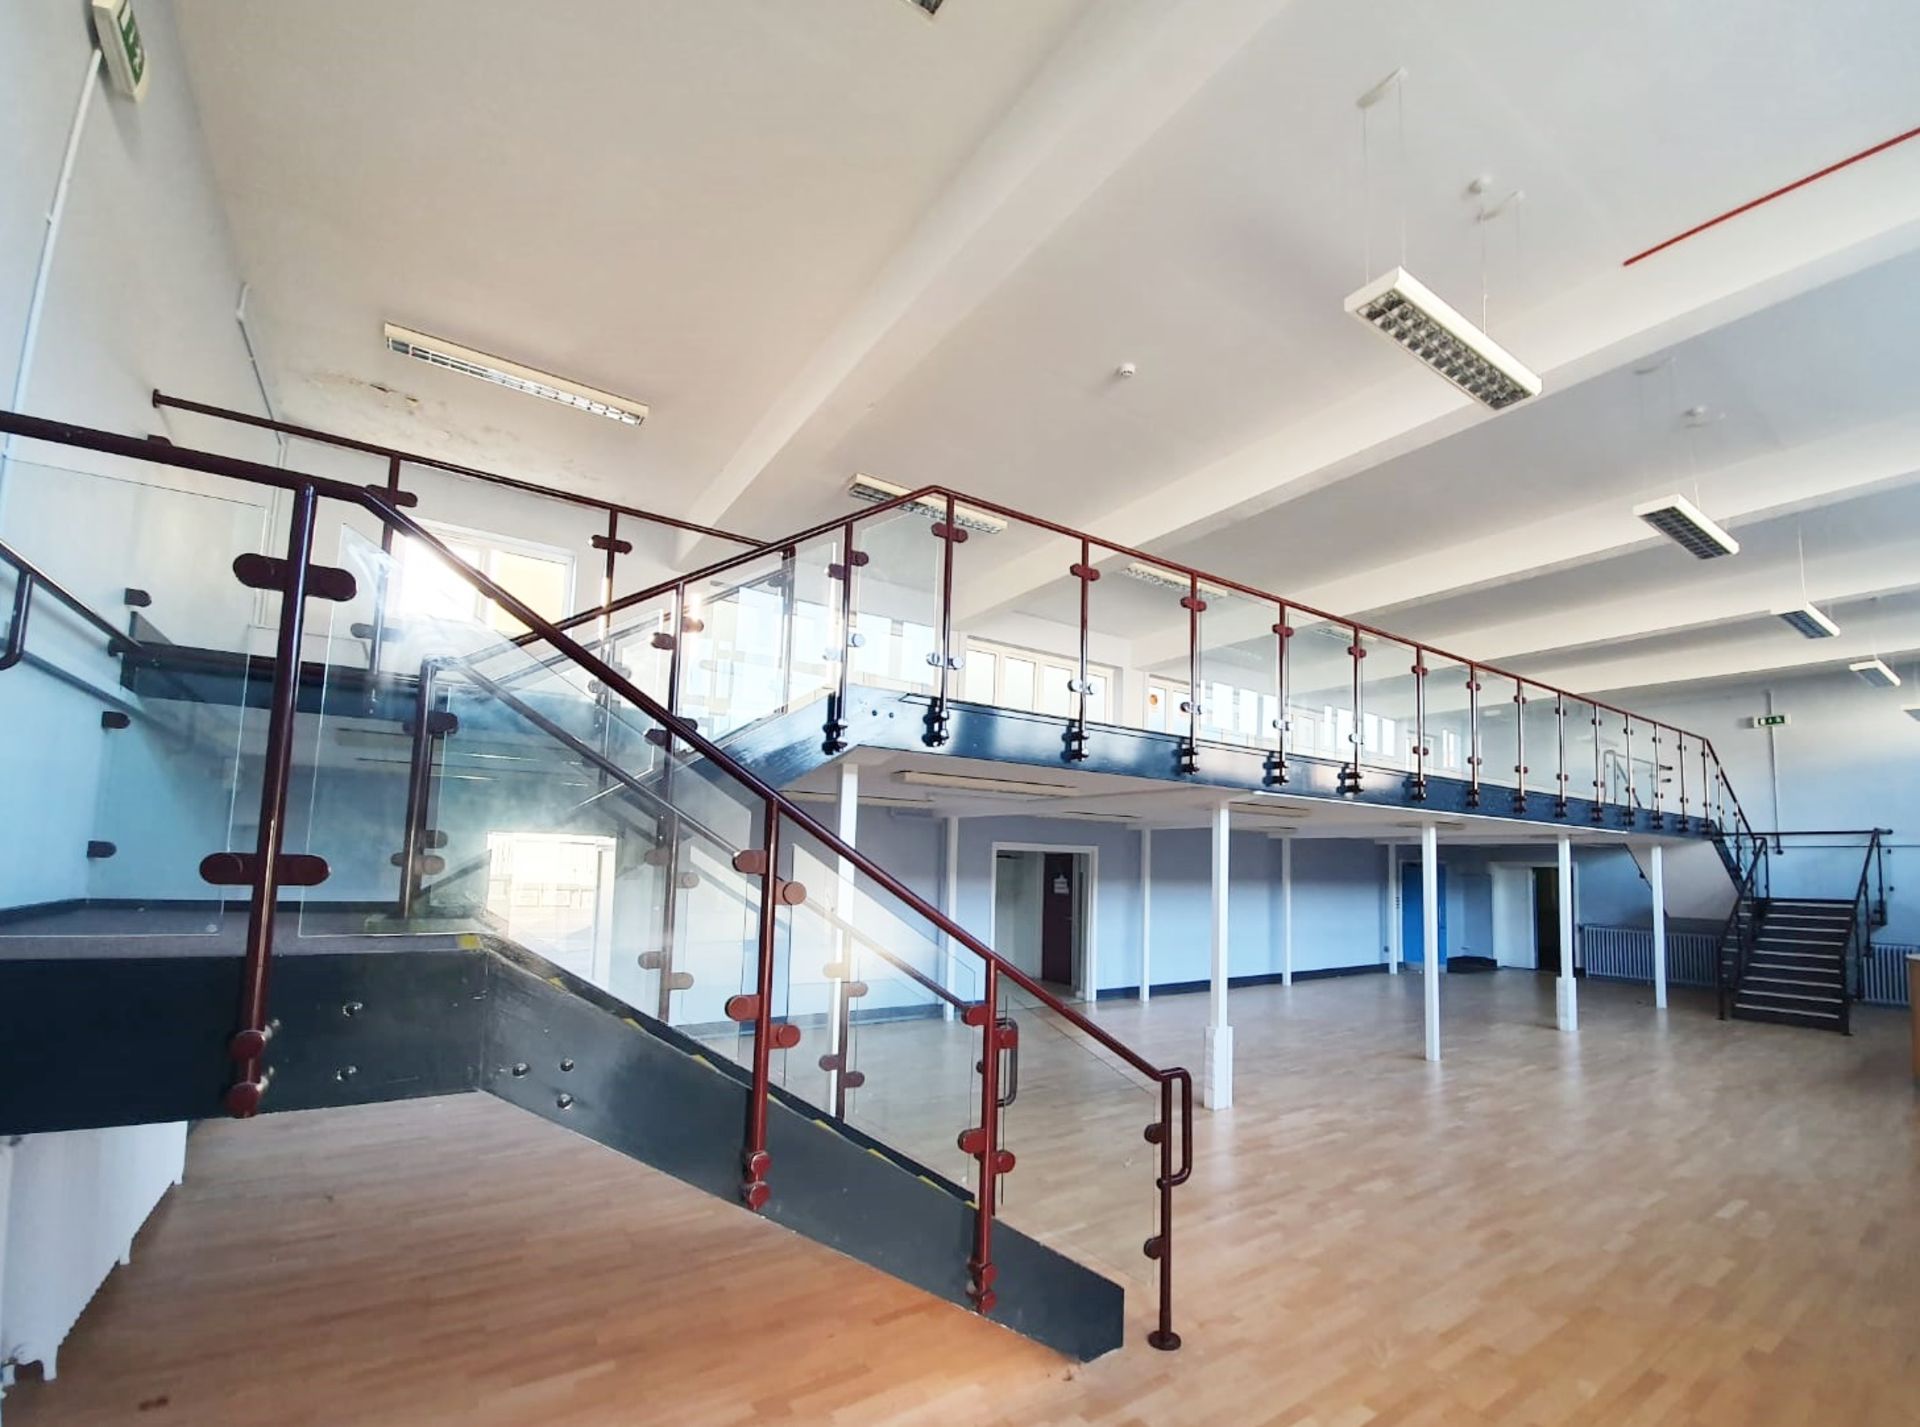 1 x Mezzanine Floor With Two Sets of Floating Stairs and Glazed Safety Panels With Hand Rails - From